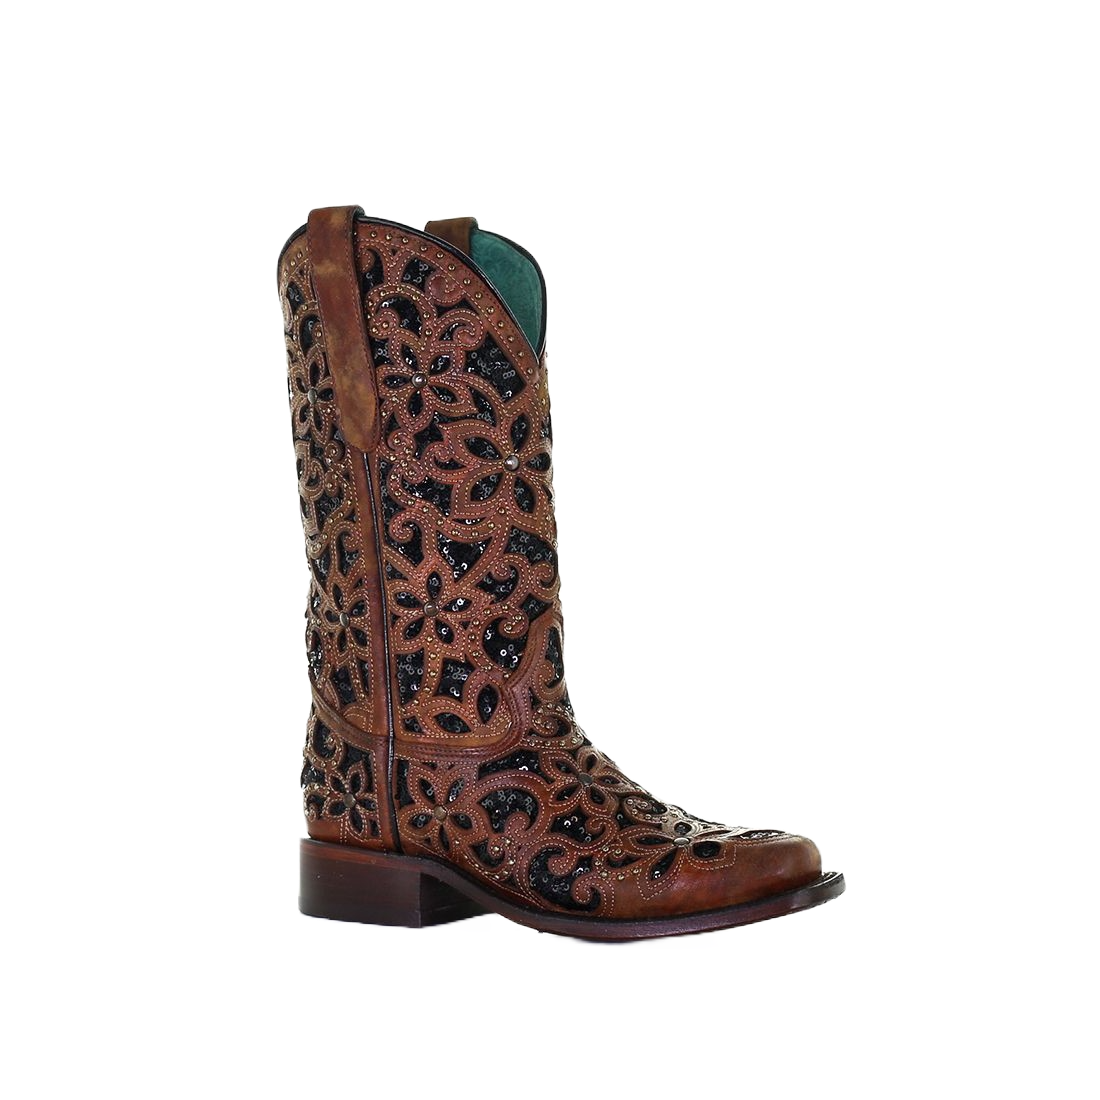 Corral Ladies Tan & Black Inlay Embroidery & Stud Boots A4129